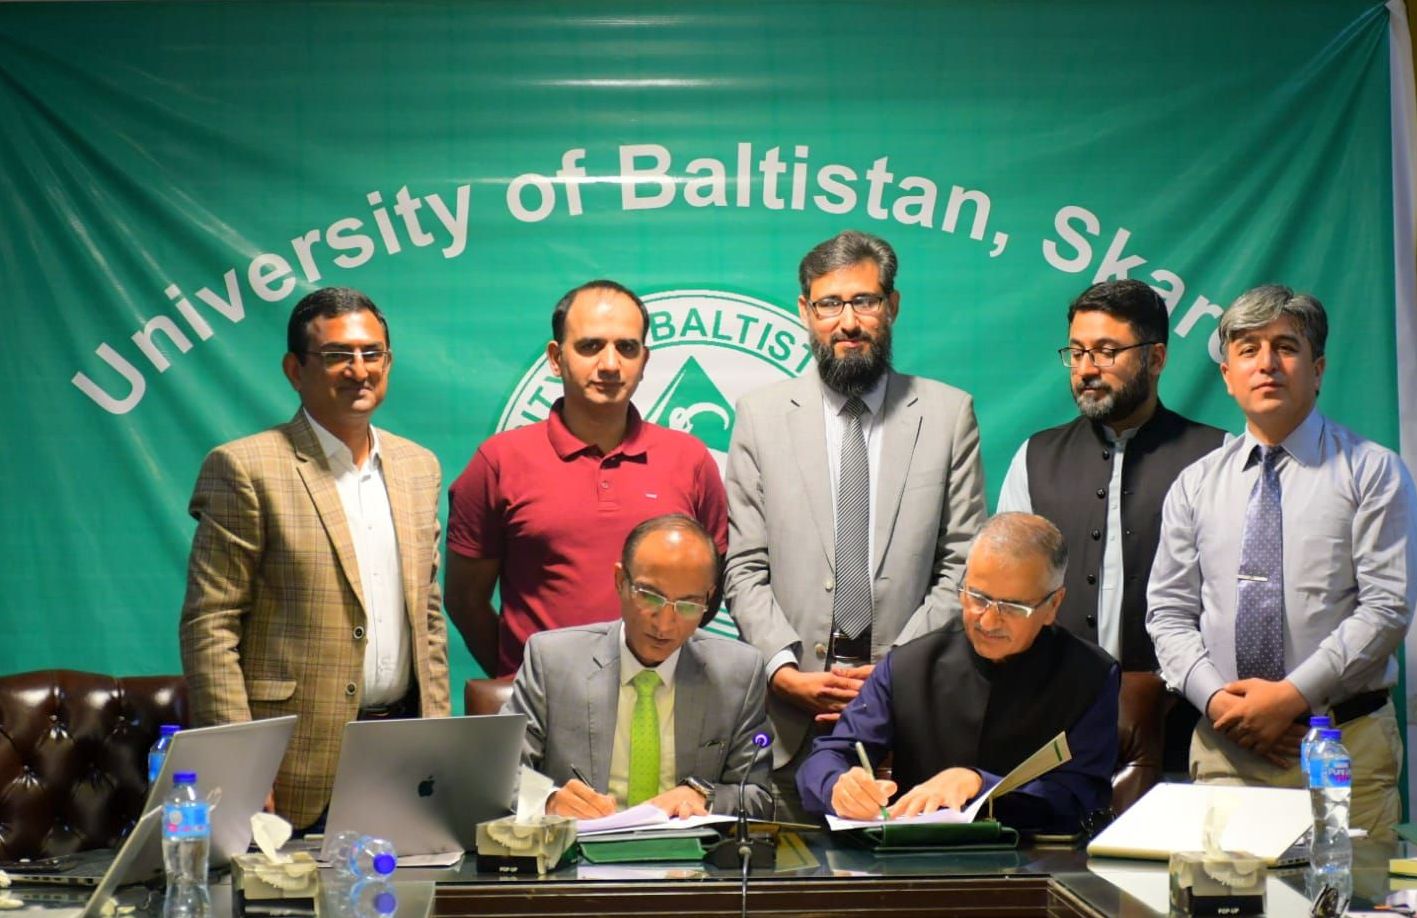 European project launched at University of Baltistan jointly with IBA Sukkur